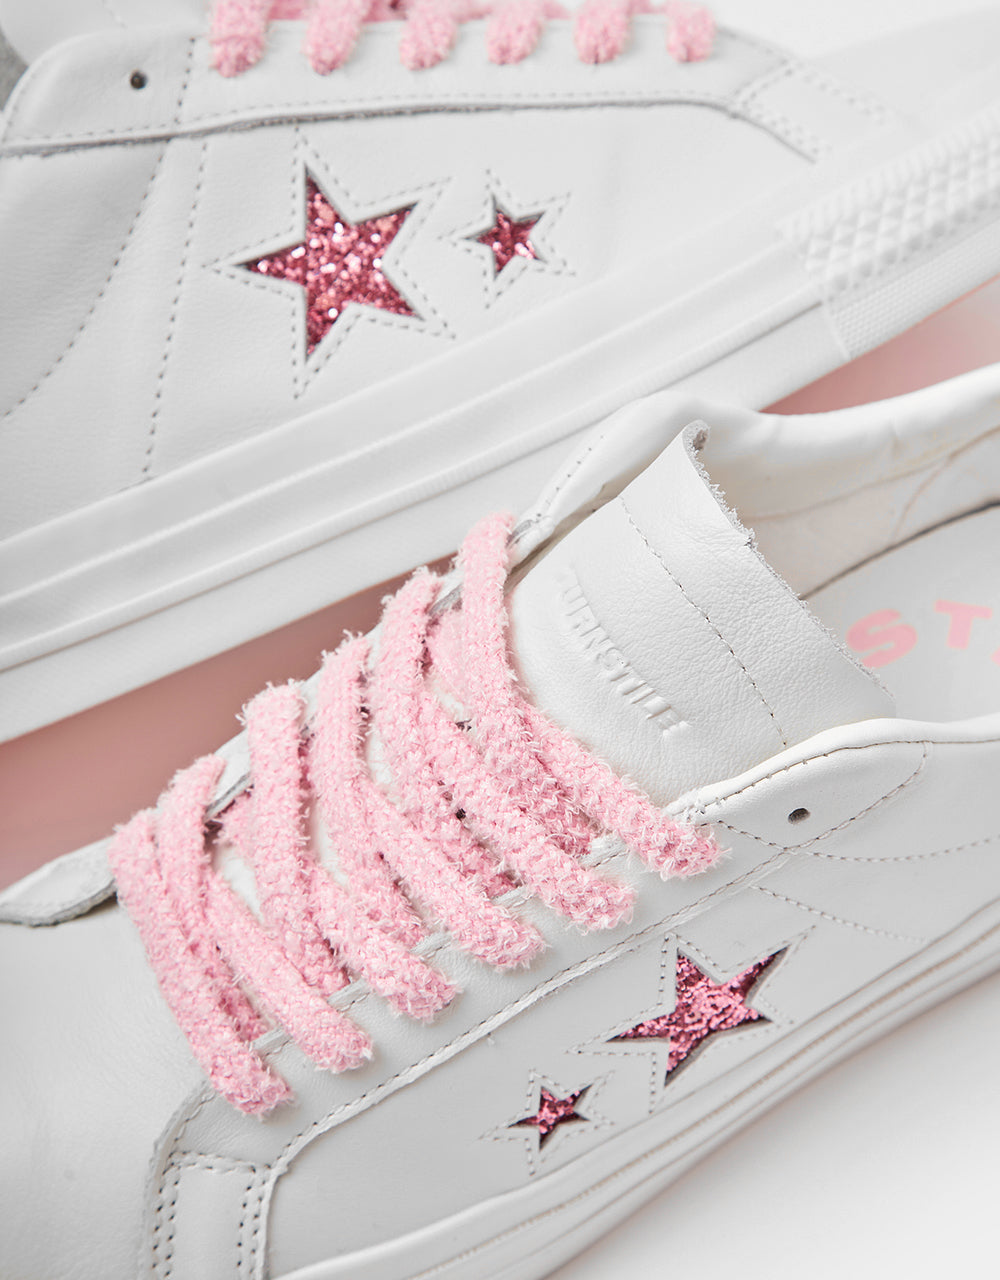 Converse x Turnstile One Star Pro Skate Shoes - White/Pink/White